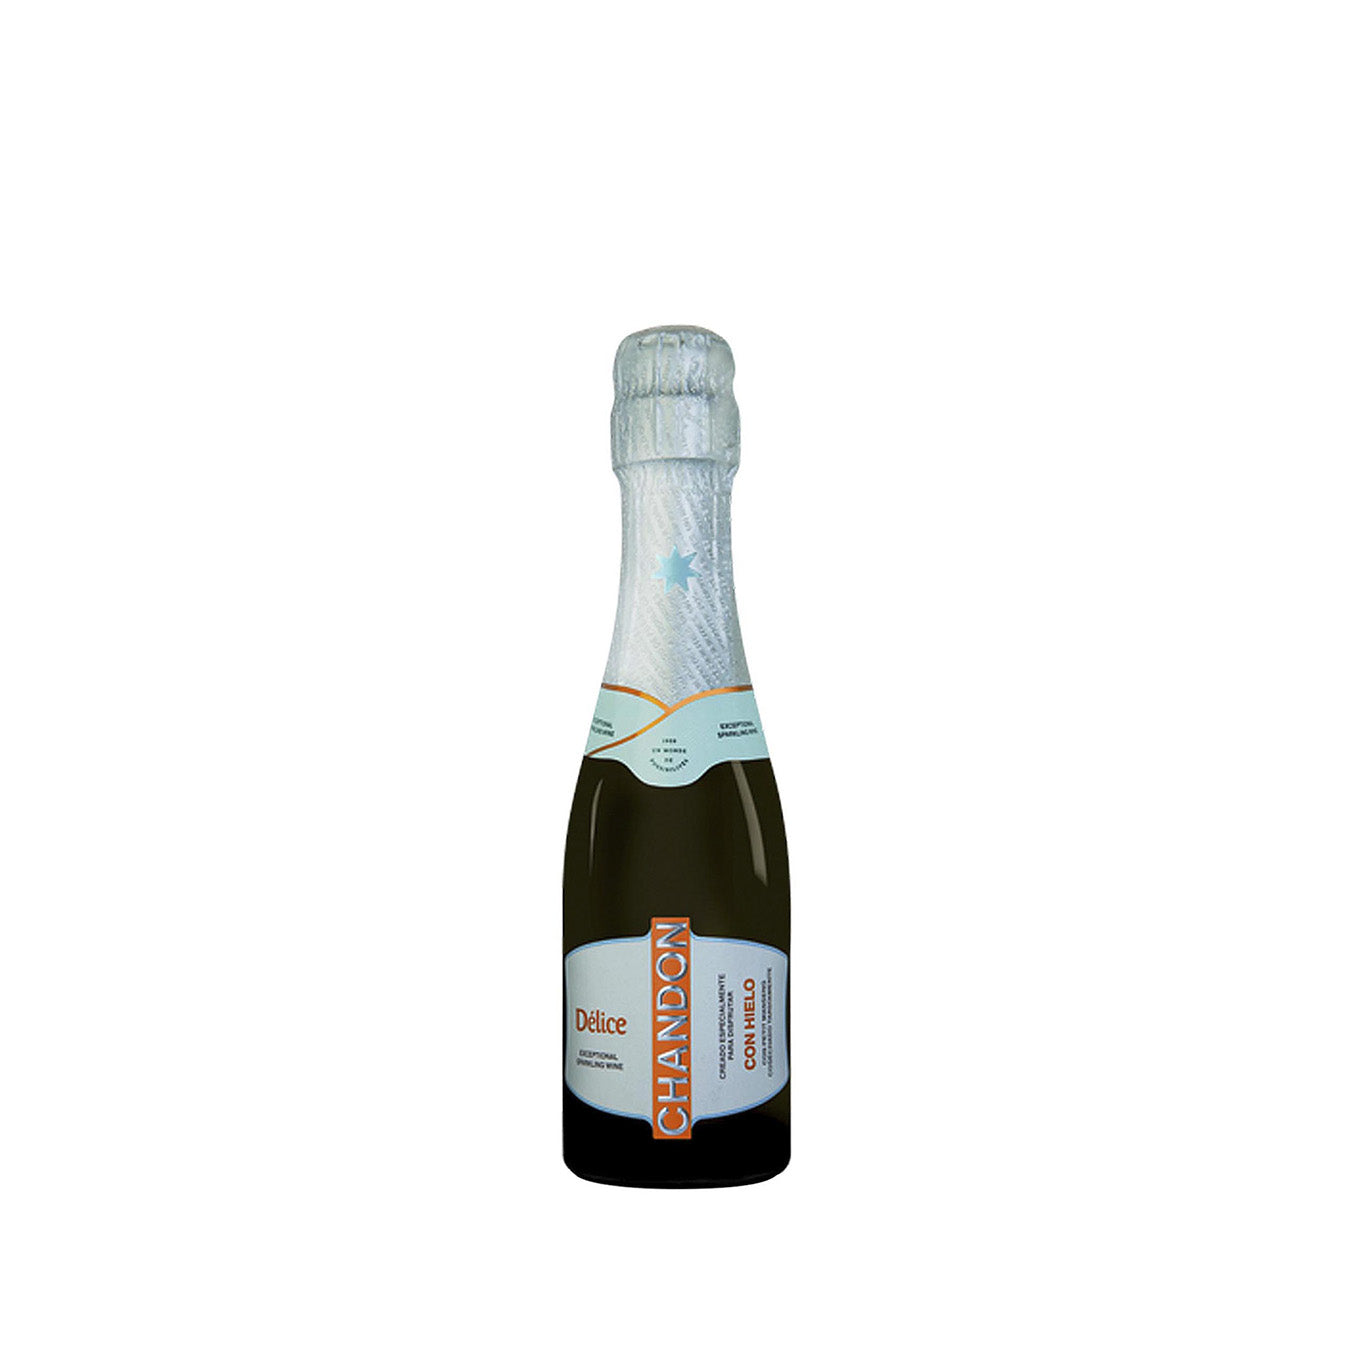 CHANDON DELICE 187 MLT 11.5%